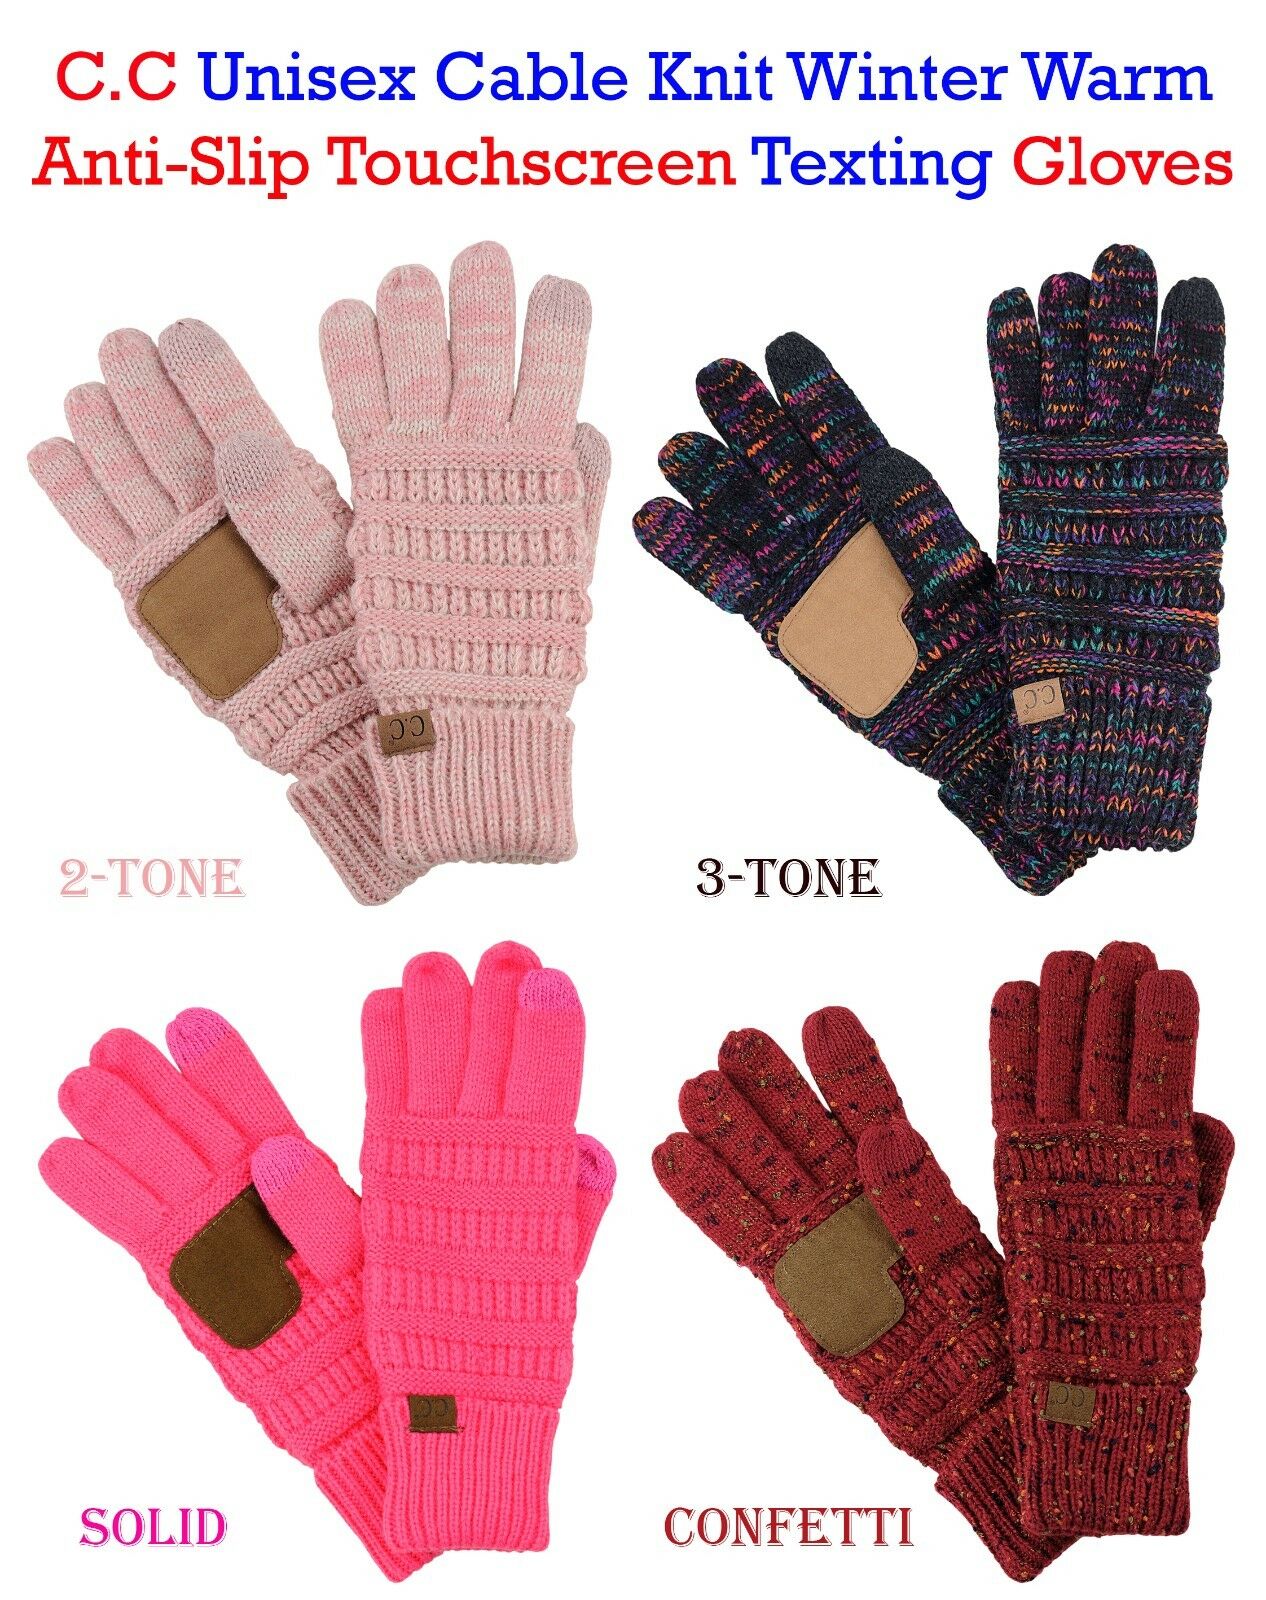 C.c Gloves Unisex Cable Knit Winter Warm Anti-slip Touchscreen Texting Cc Gloves